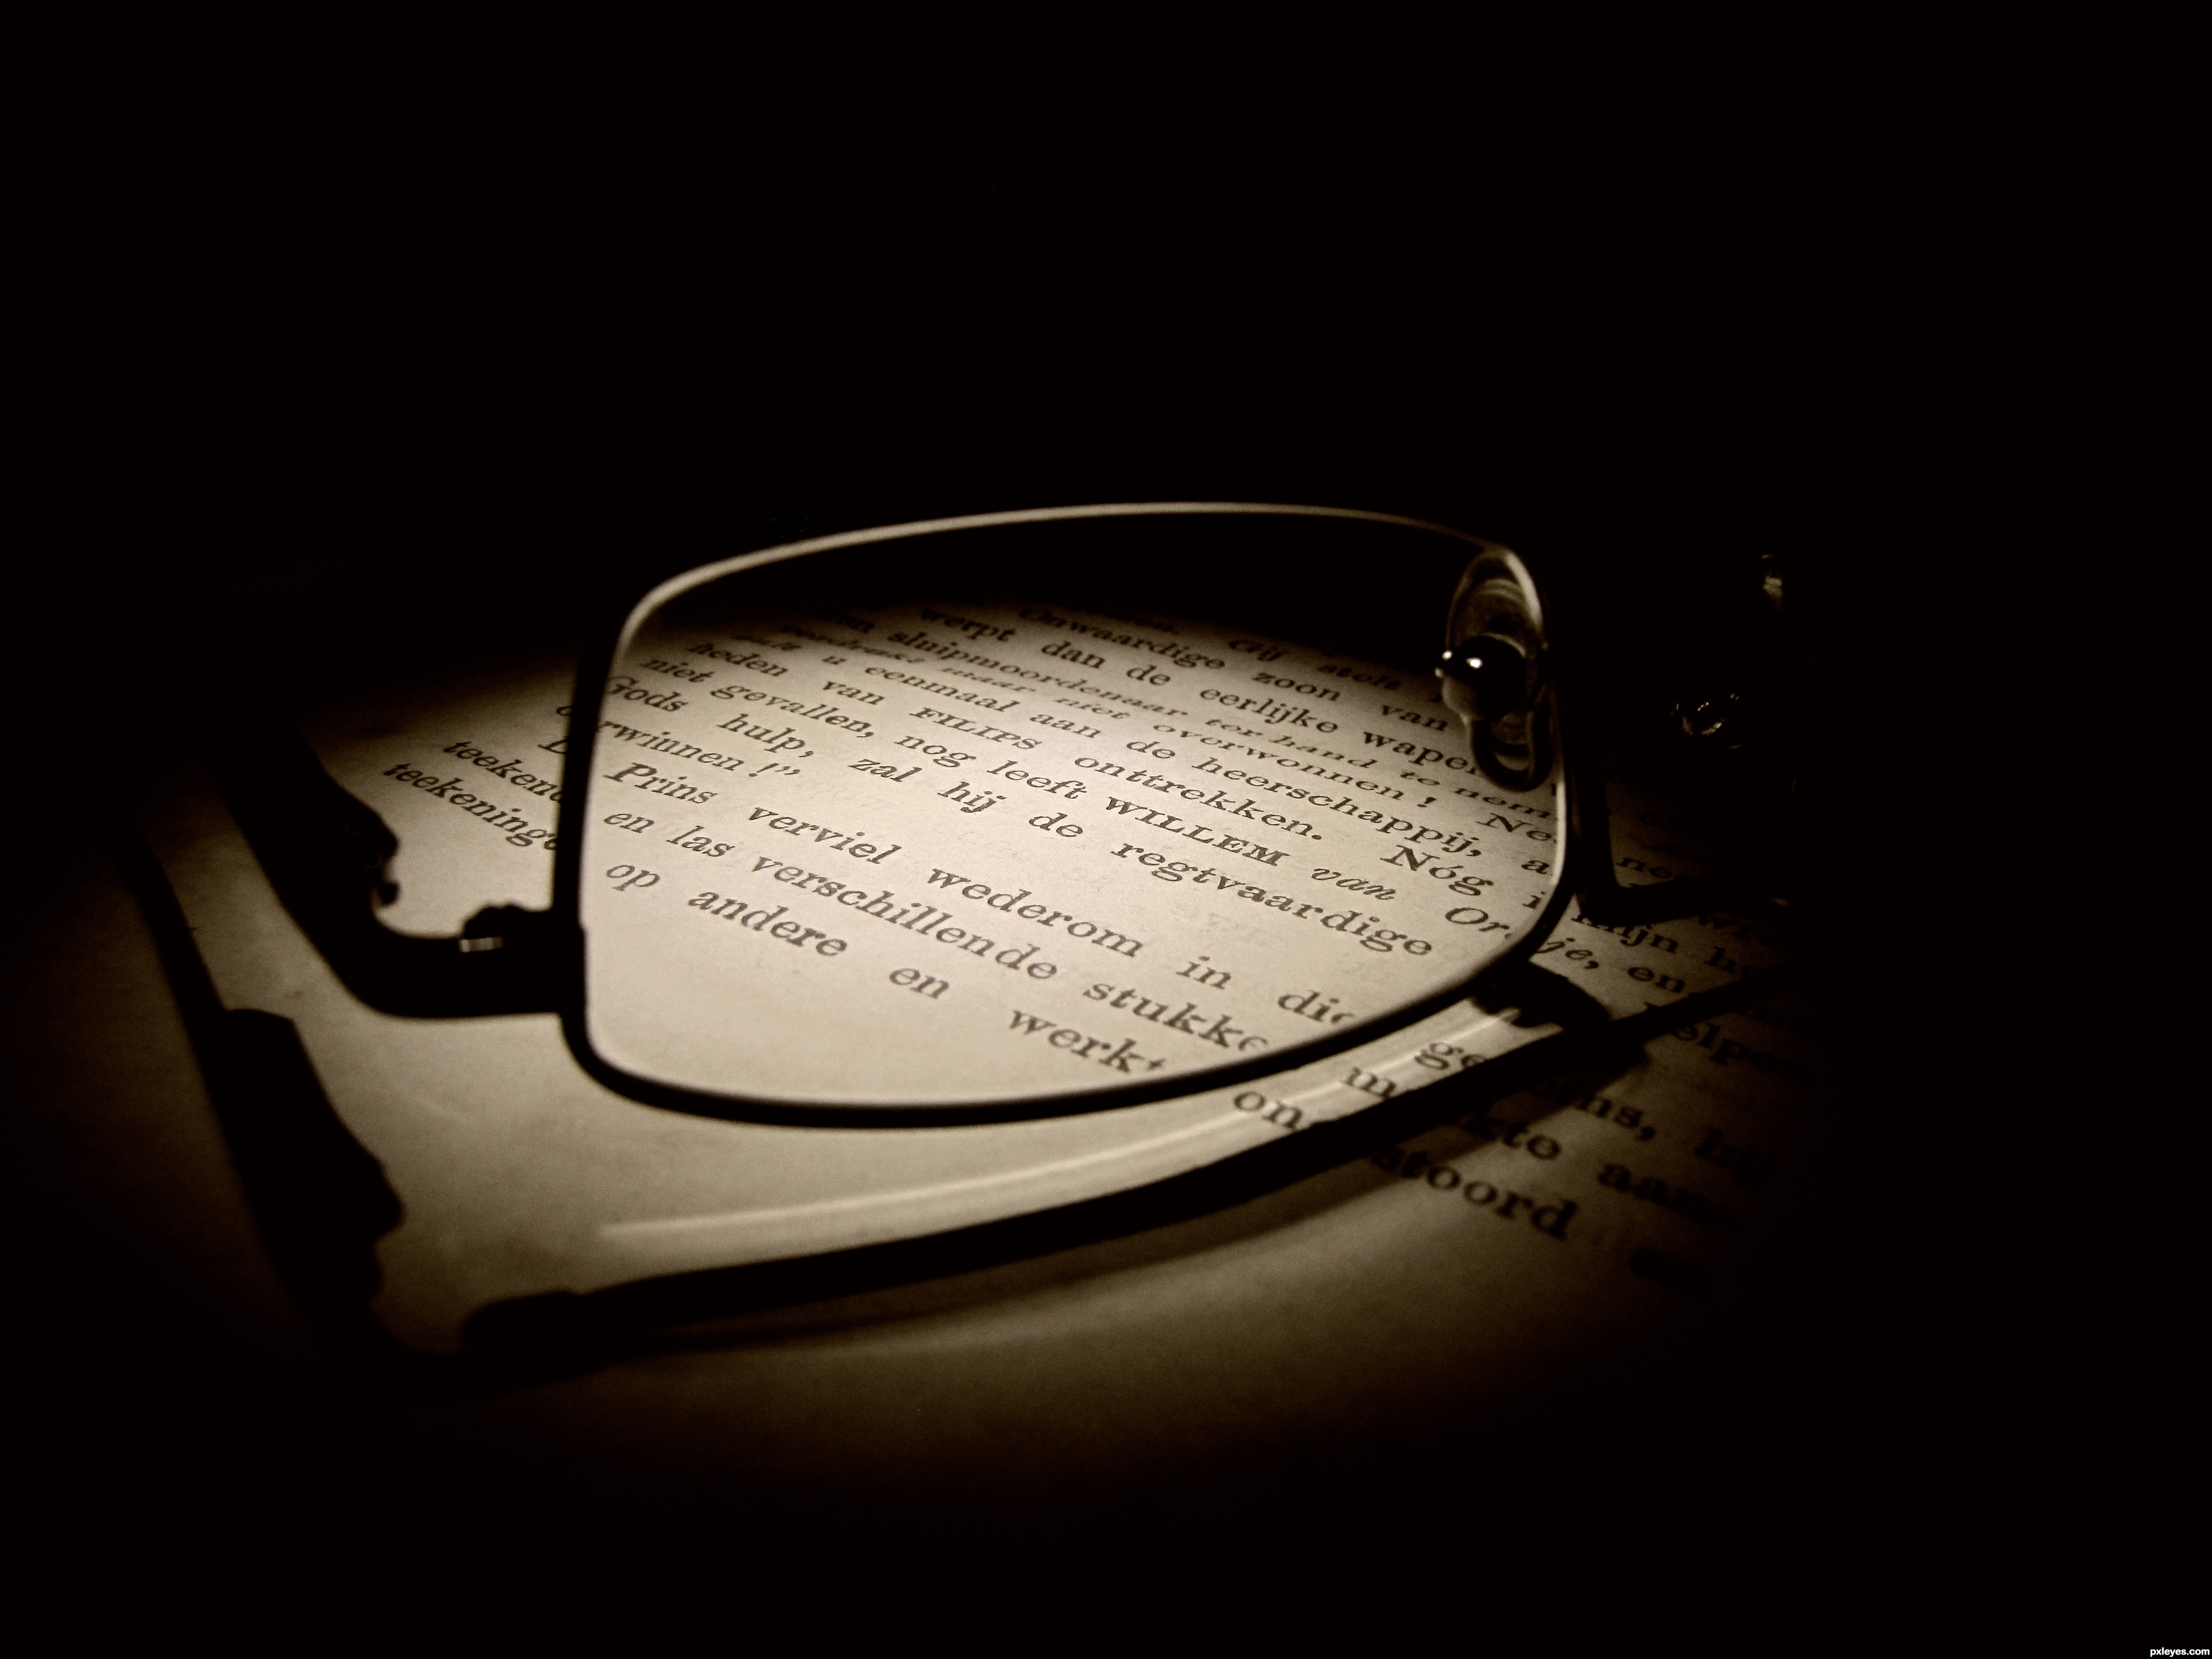 The old book picture, by robvdn for: through glasses photography ...